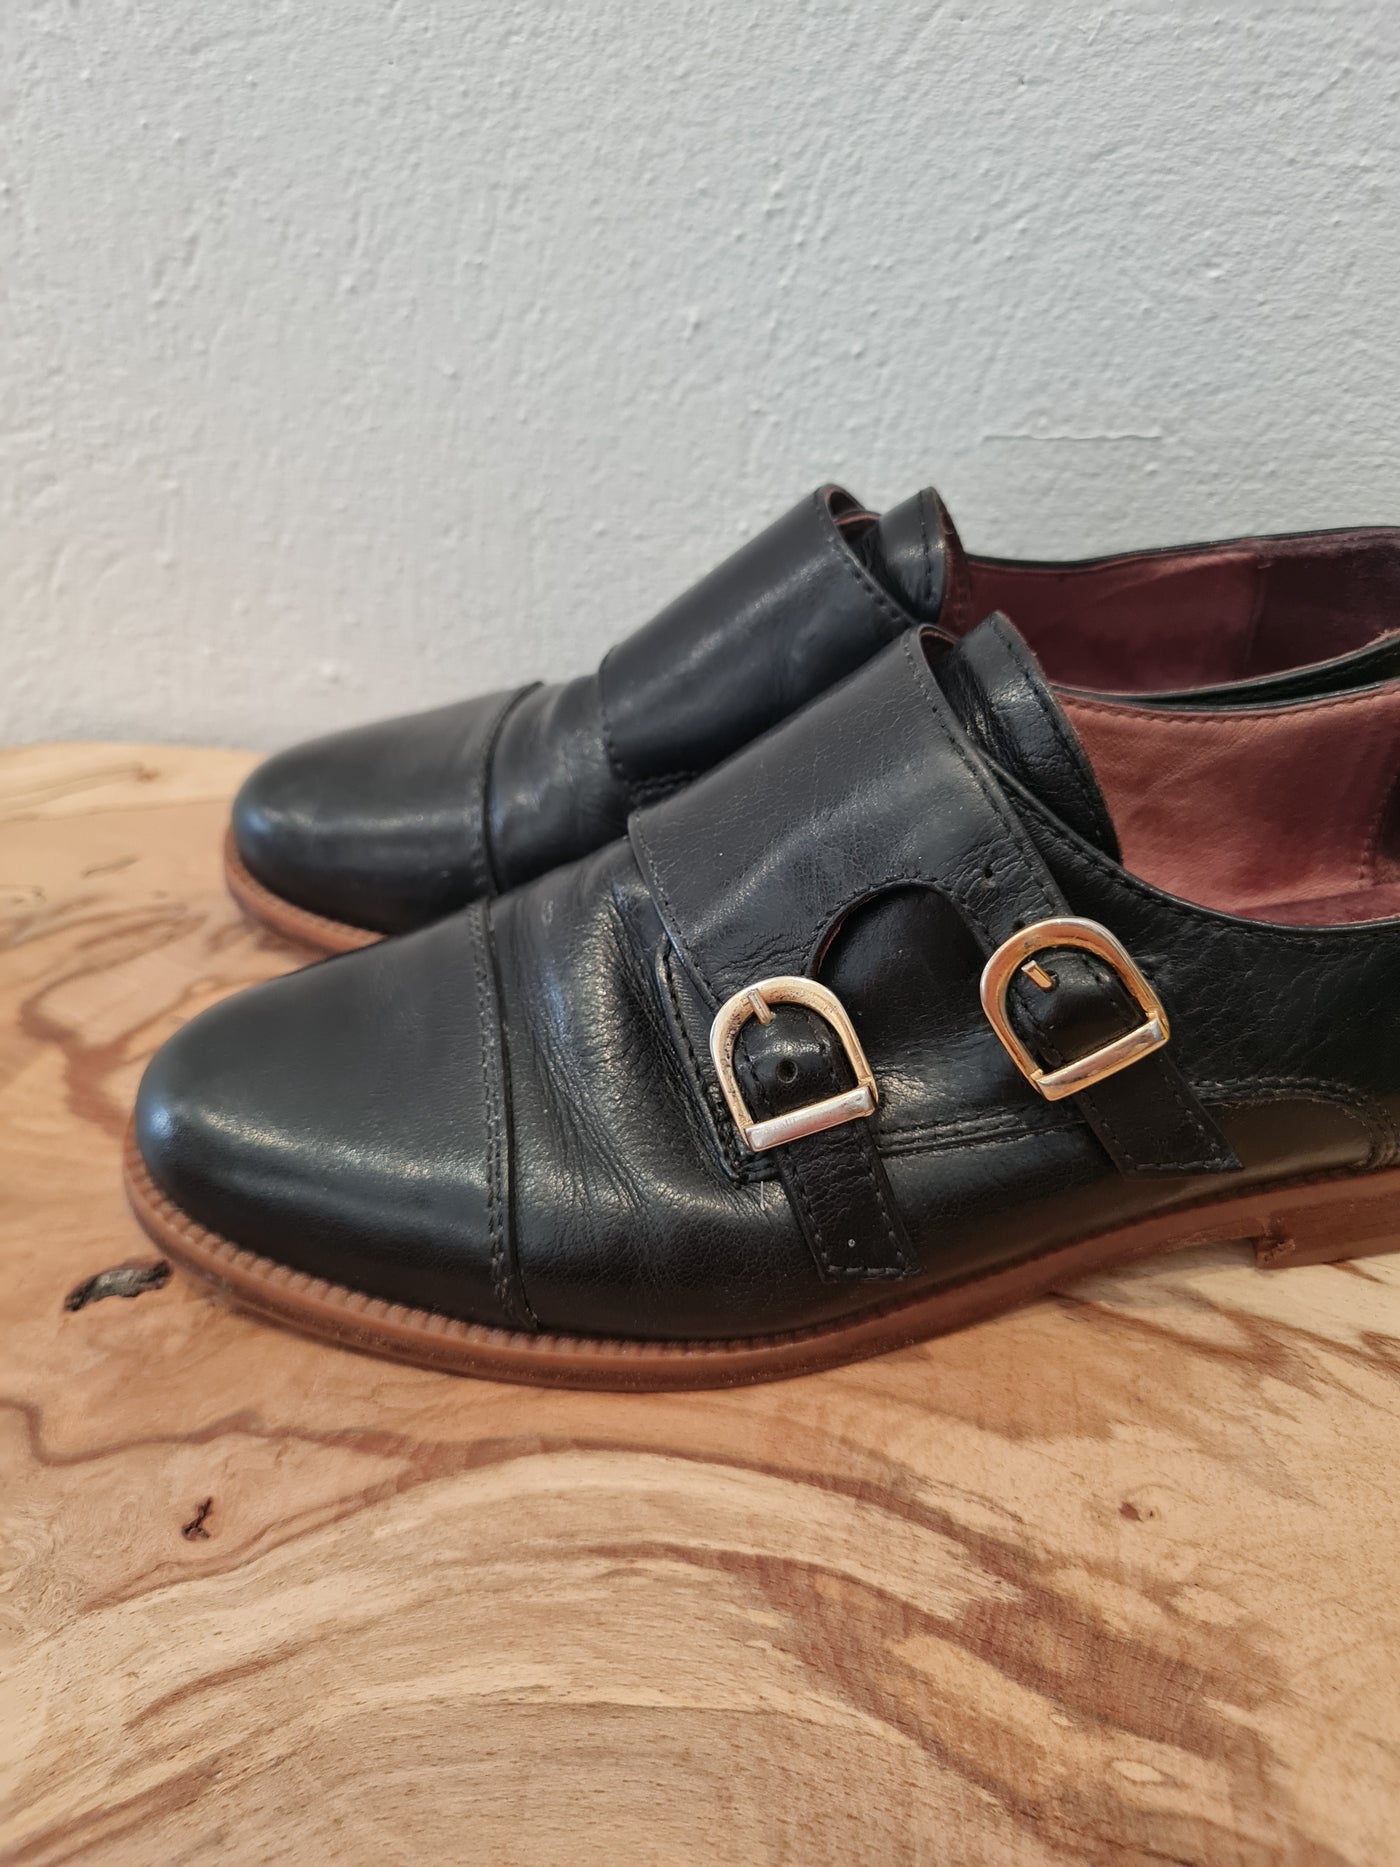 Russell & Bromley Black Brogues Size 4